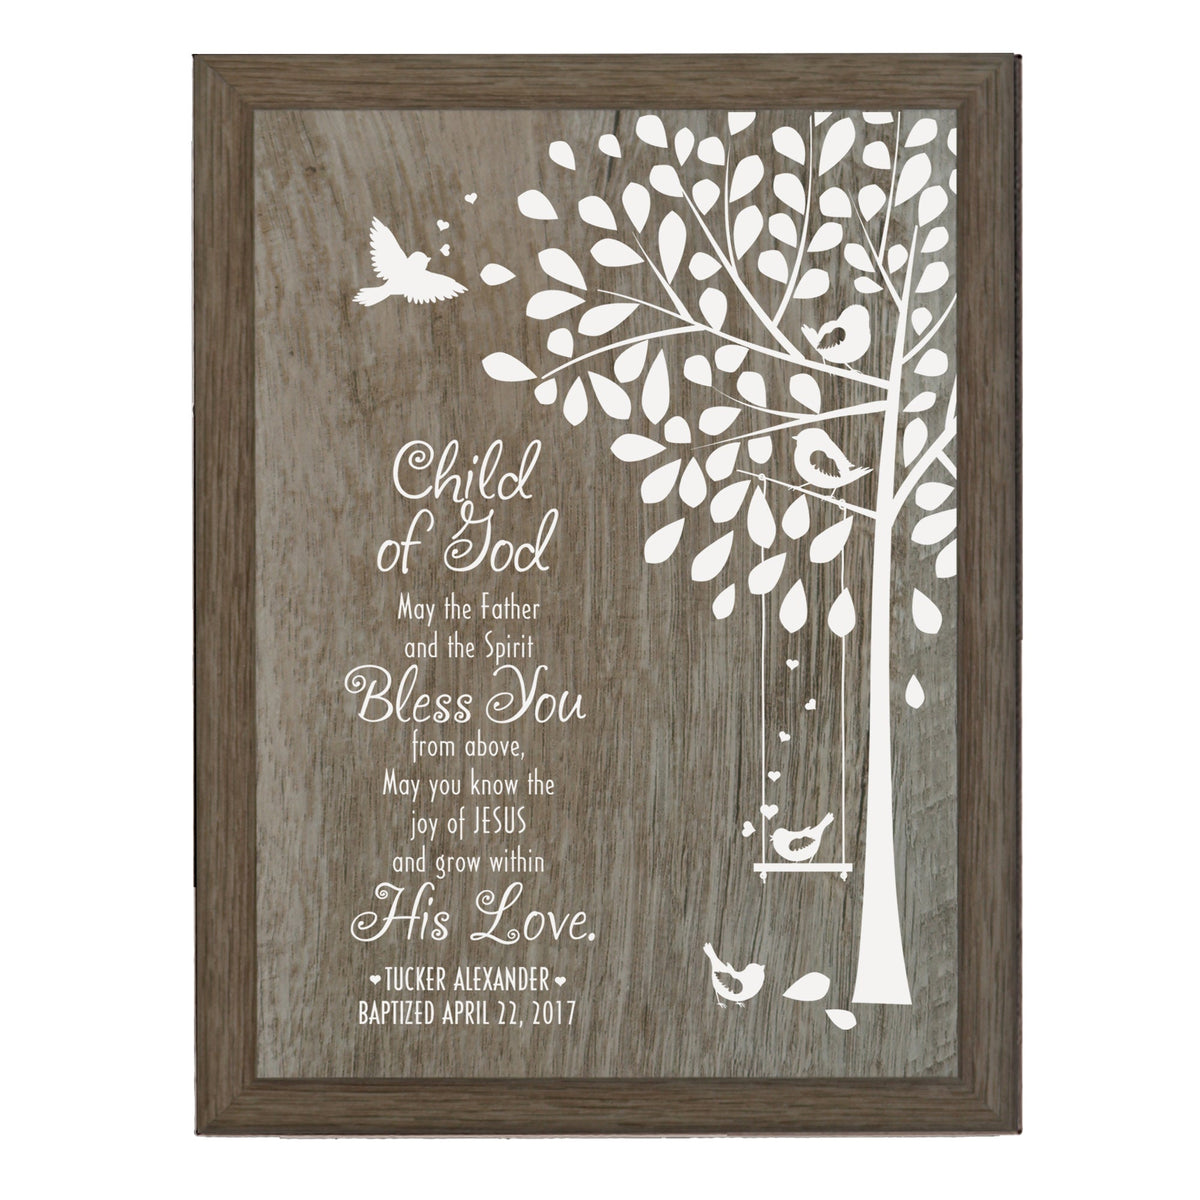 Personalized Baptism Godchild Tree Plaques - May The Father - LifeSong Milestones